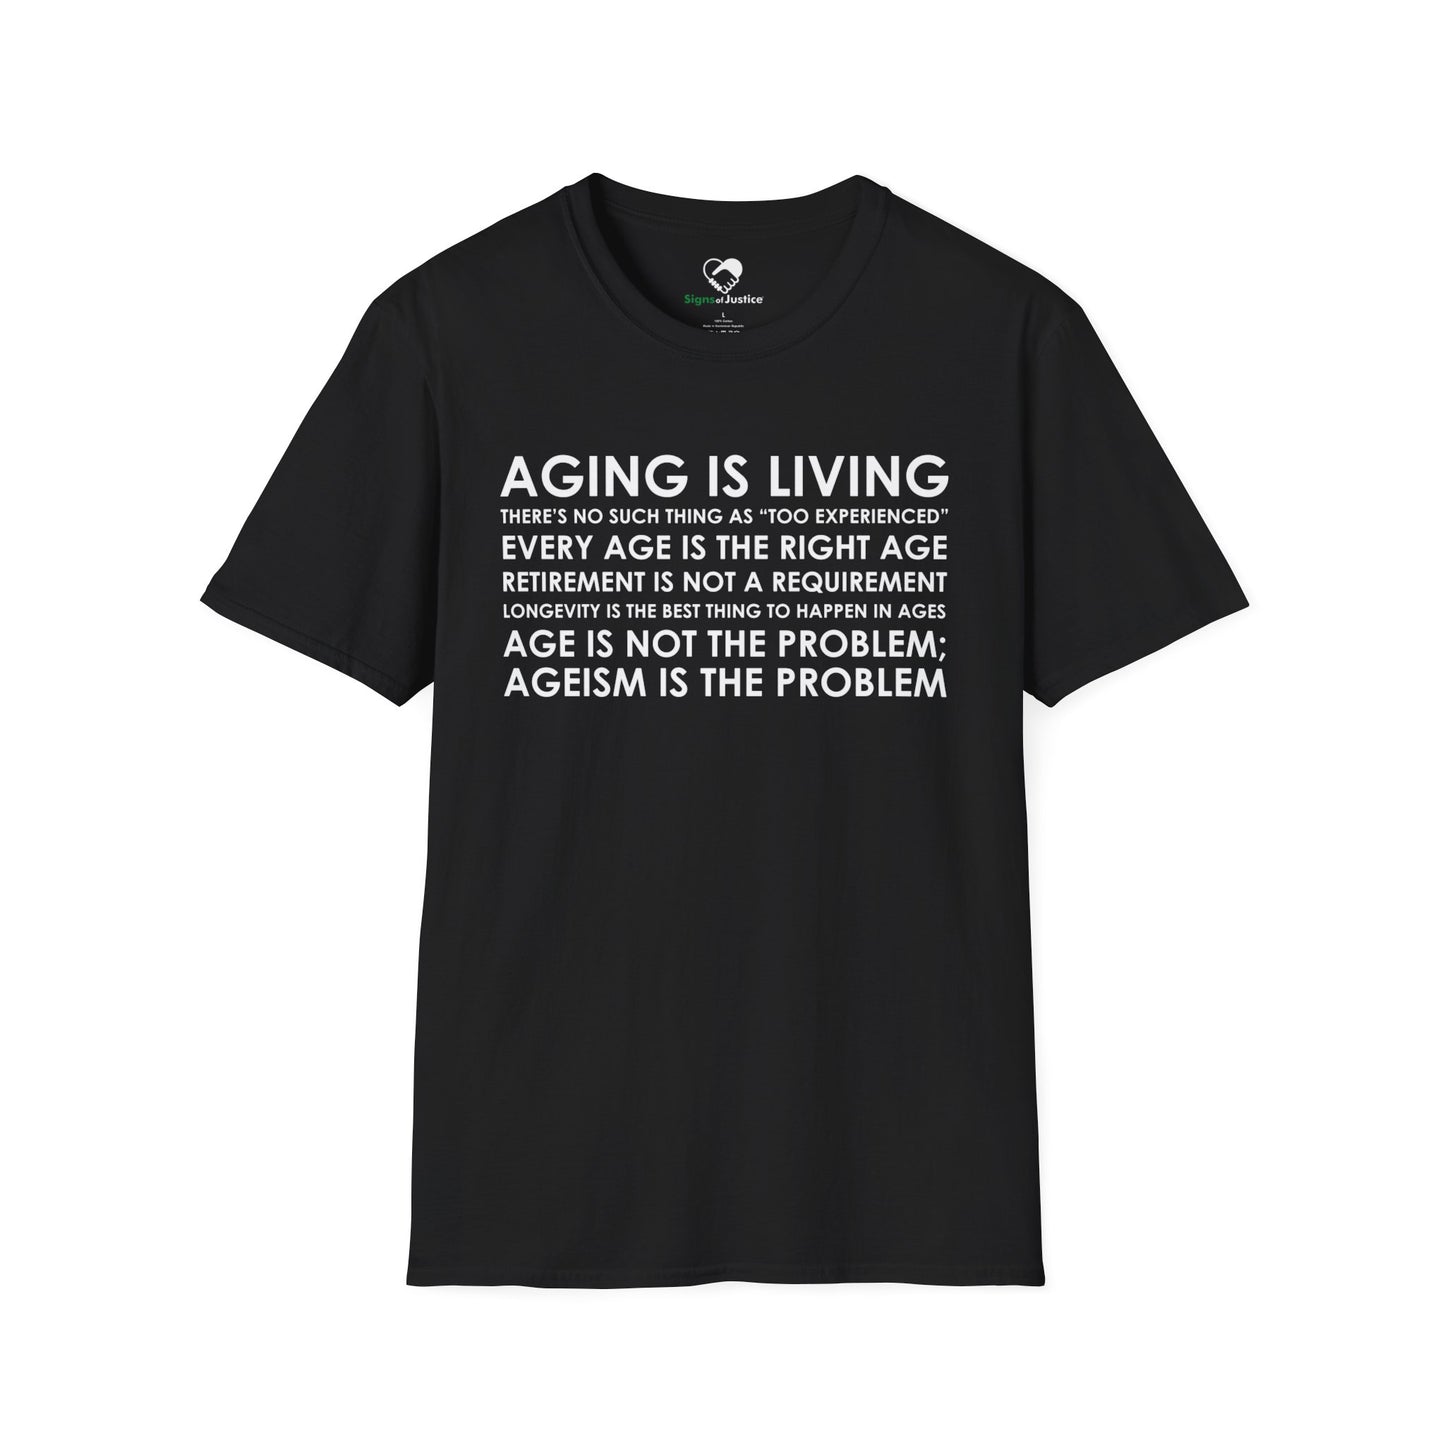 "Aging Is Living" Unisex T-Shirt